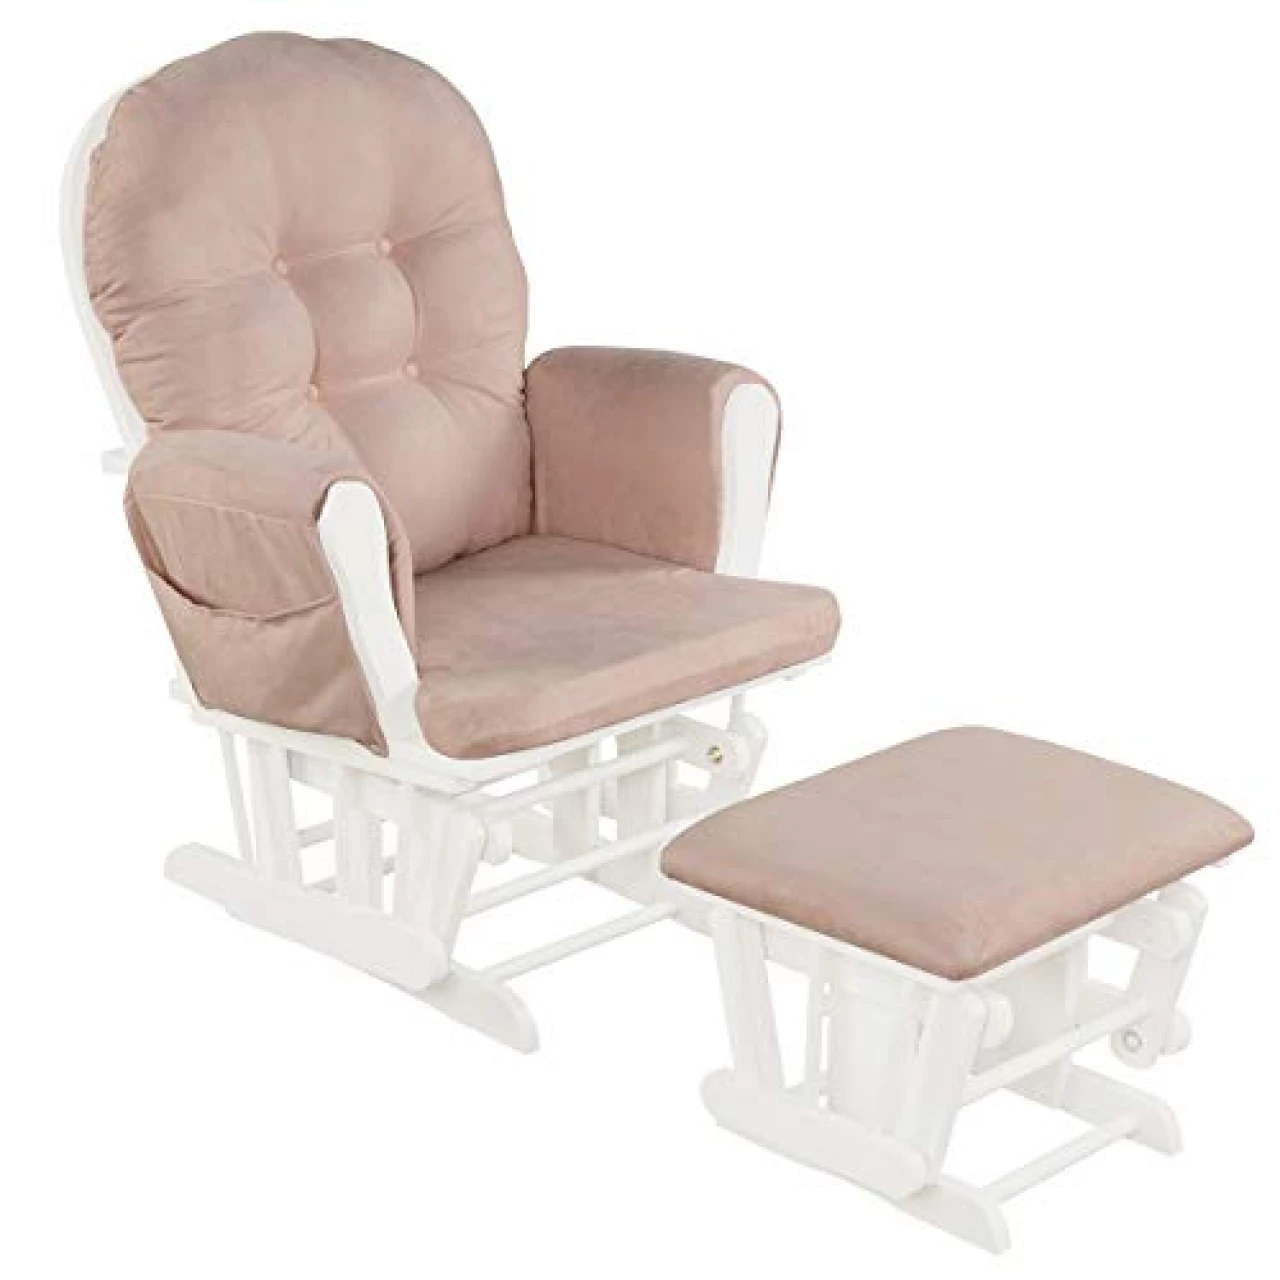 Costzon Nursery Glider with Ottoman, Upholstered Comfort Glider Rocker with Padded Cushion, Storage Pocket, Solid Wood Base, Rocking Chair Nursery for Breastfeeding, Maternity, Napping (Pink)